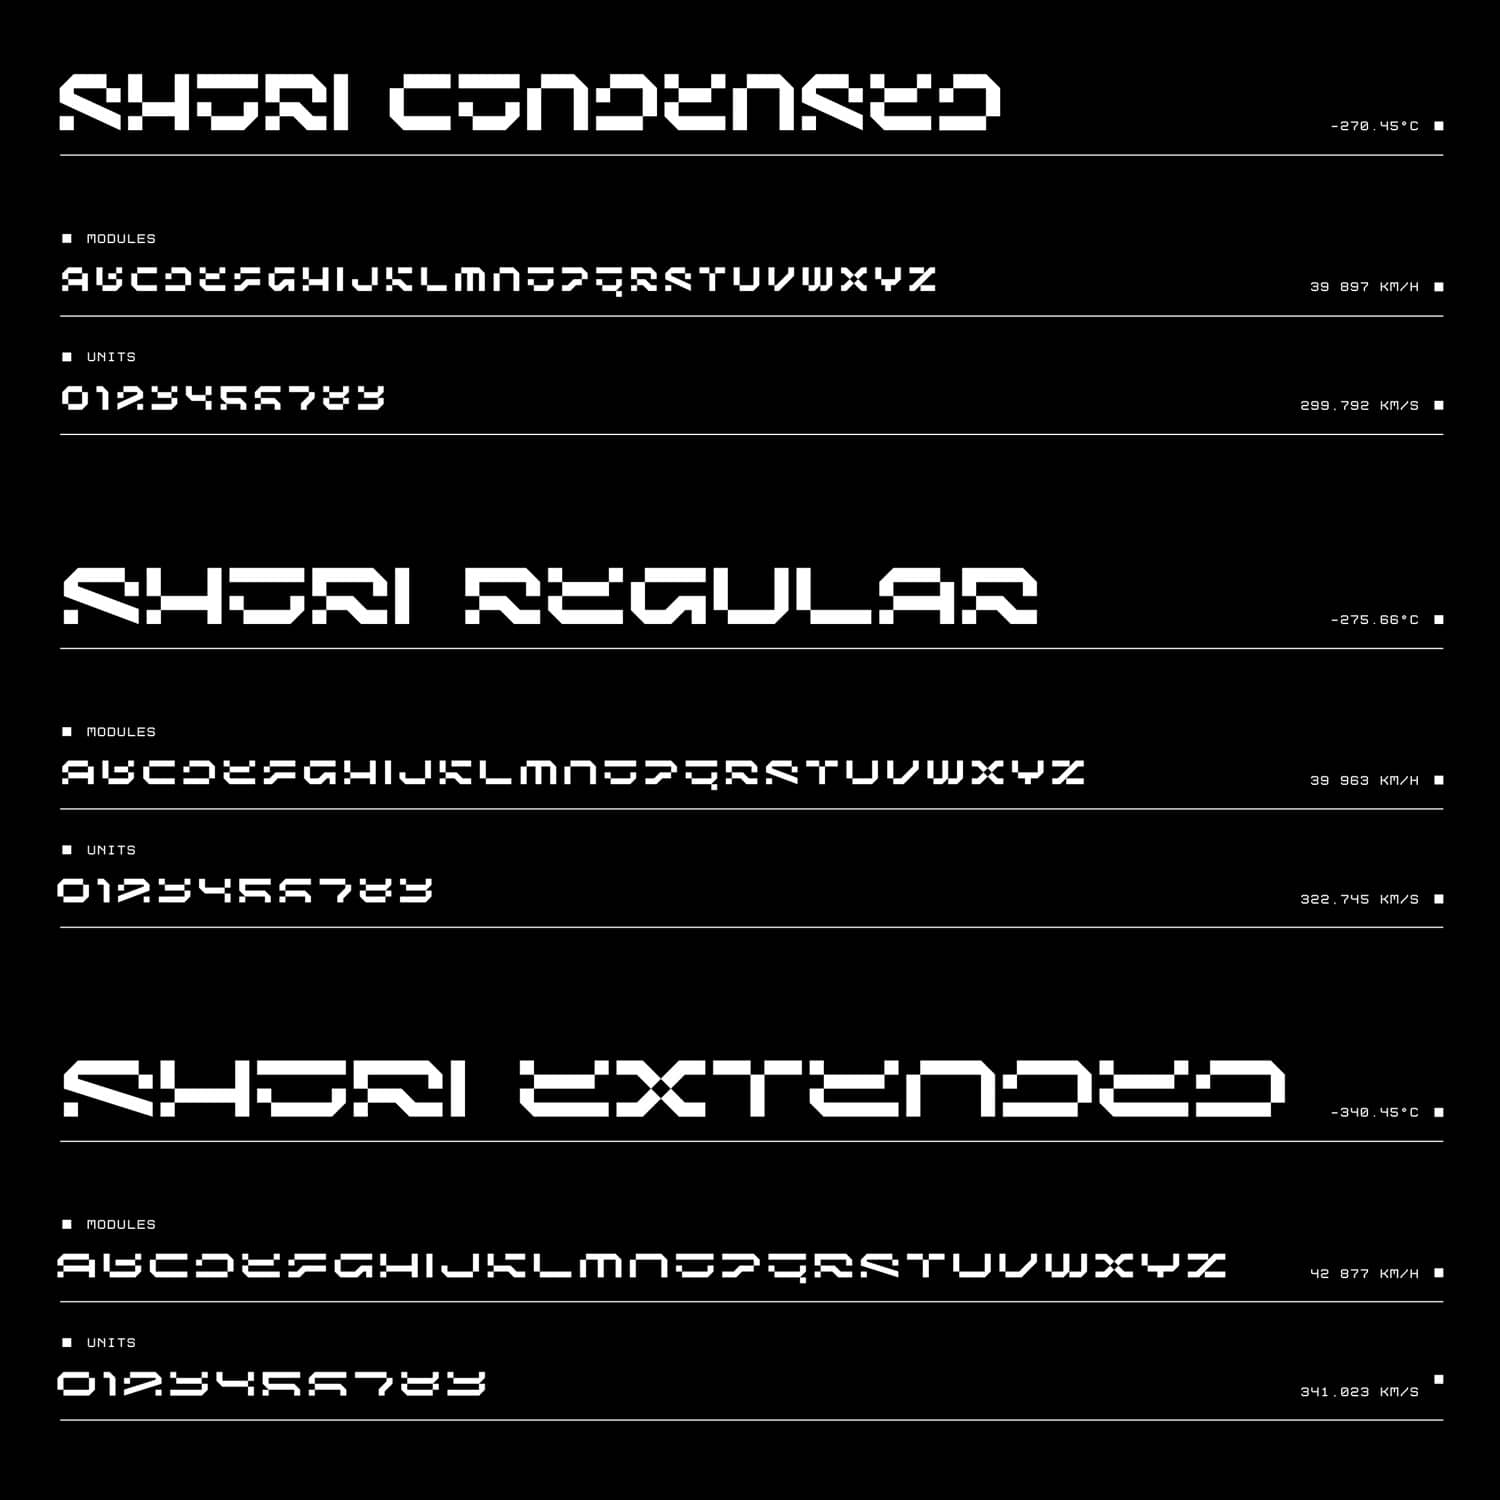 Glyph Variation Display for Shori Typeface